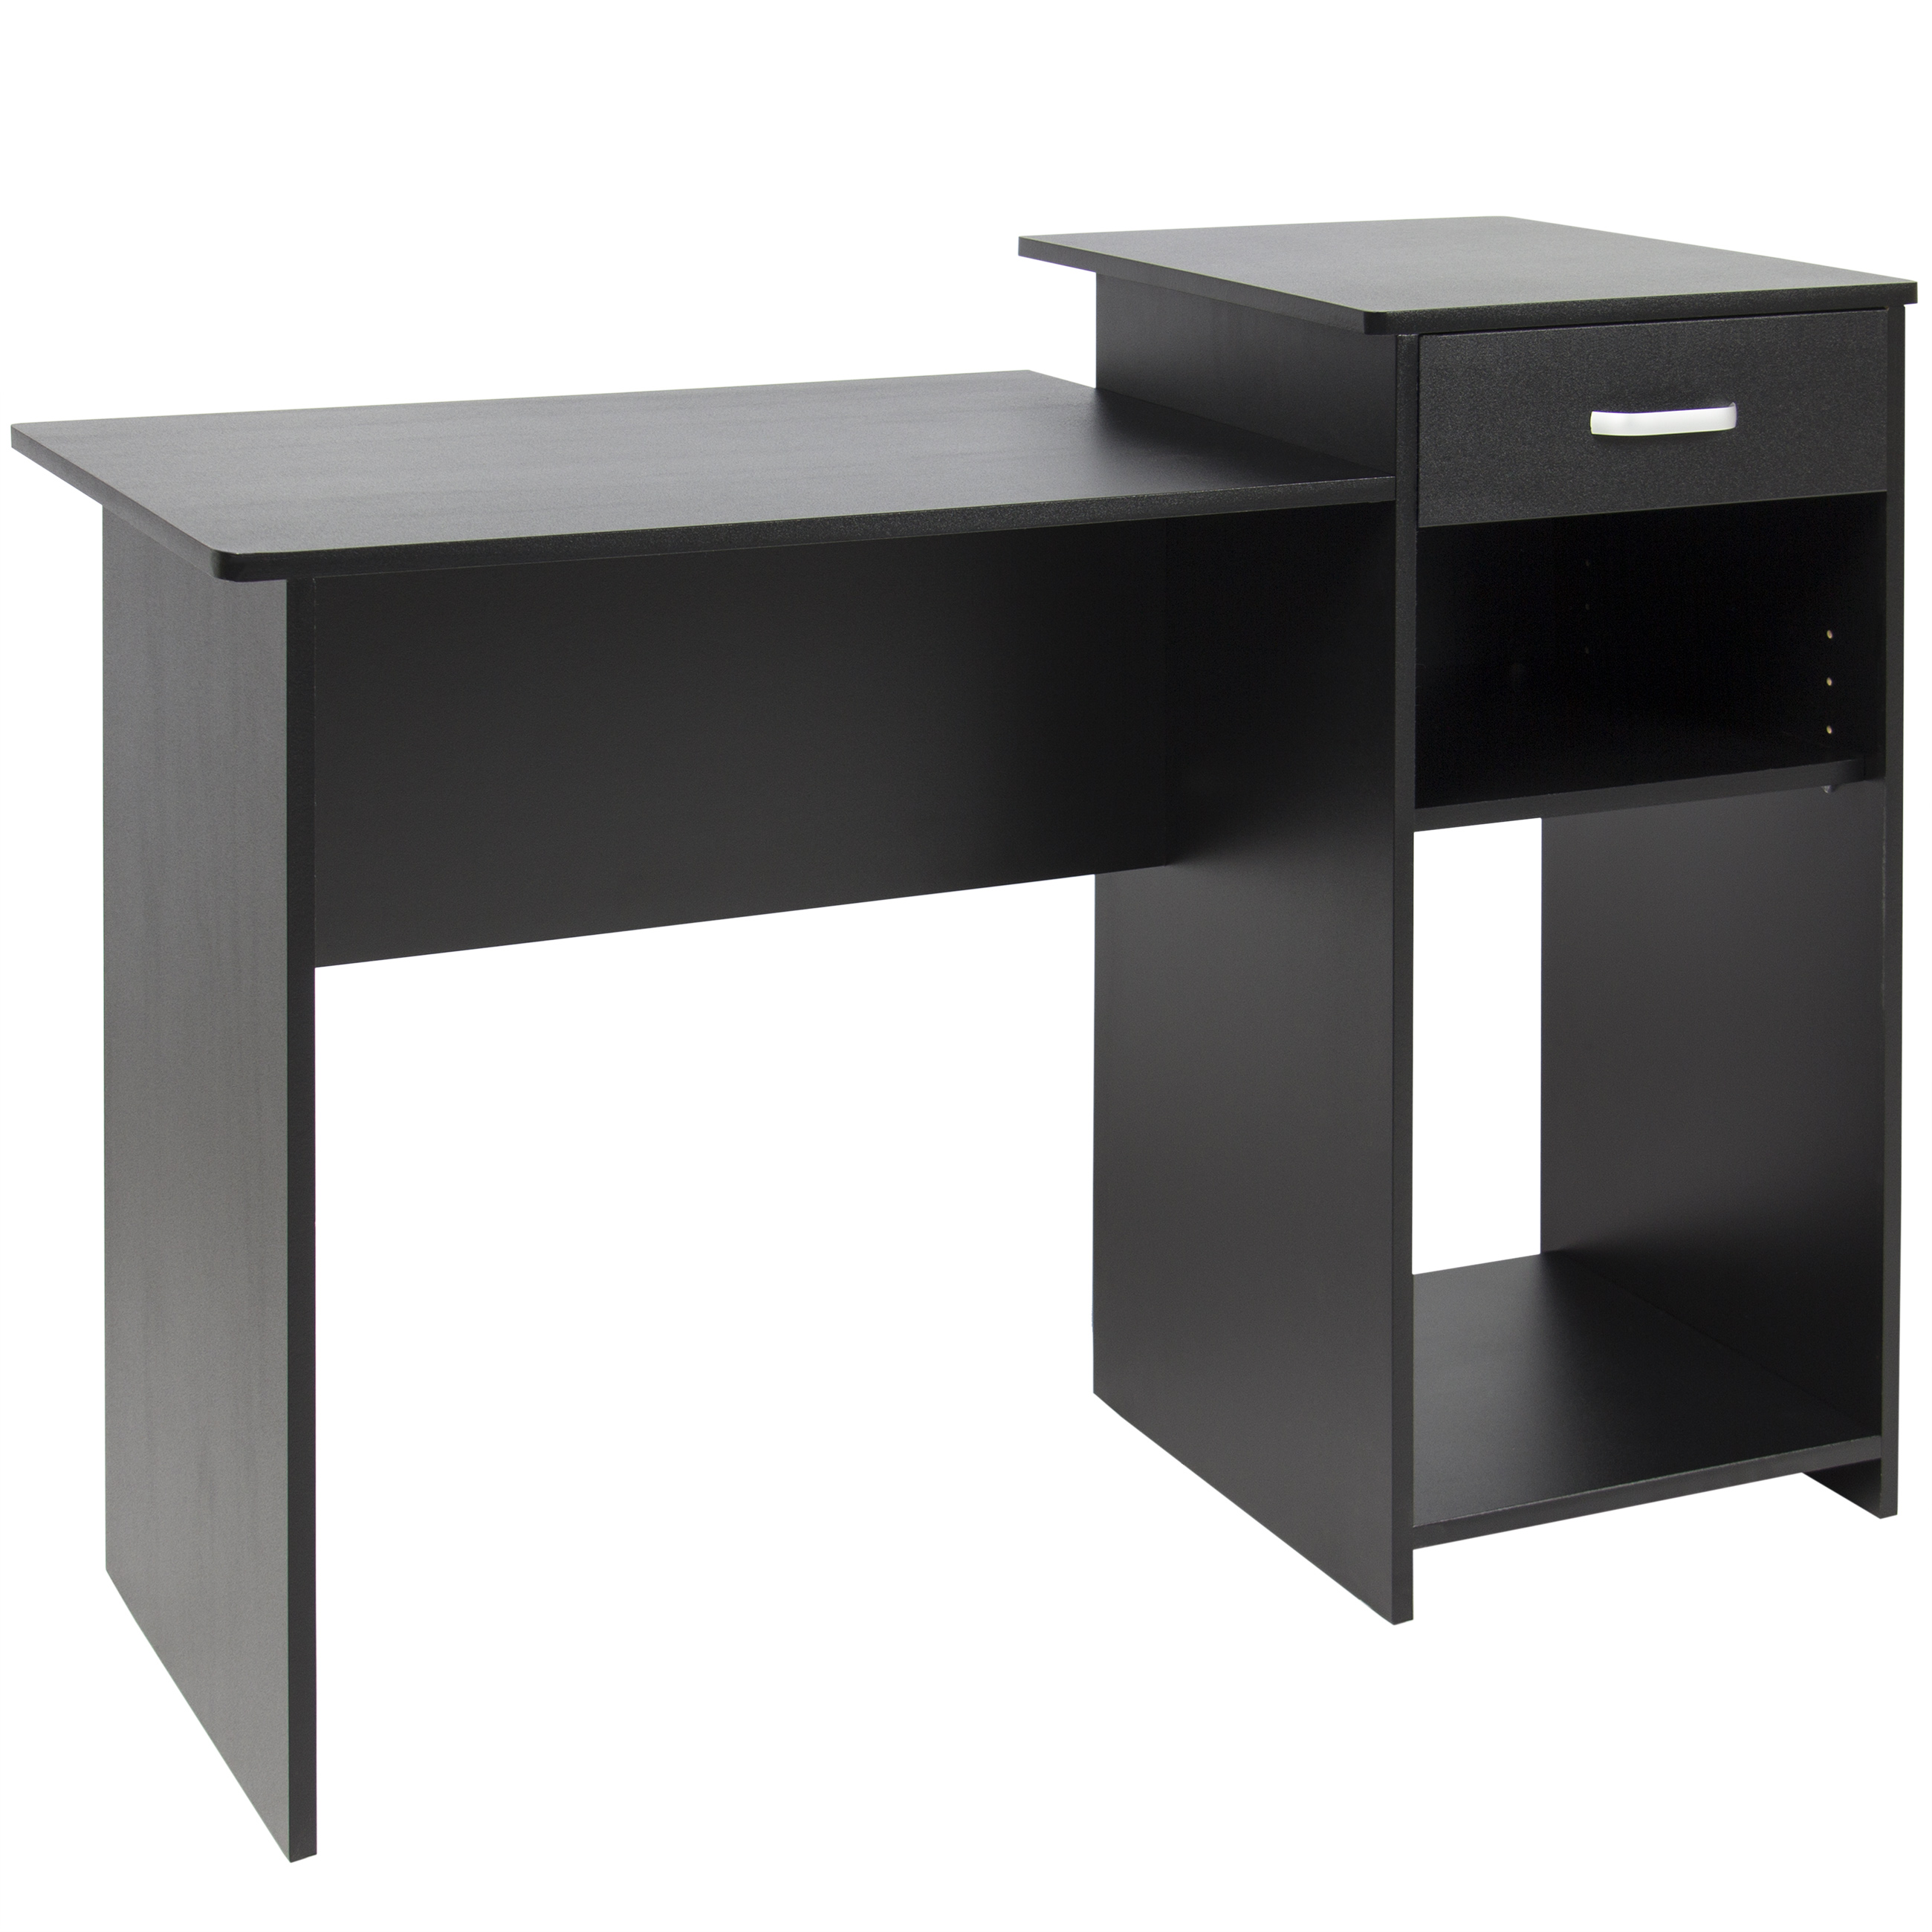 black desk best choice products student computer desk home office wood laptop table XSIYWJJ